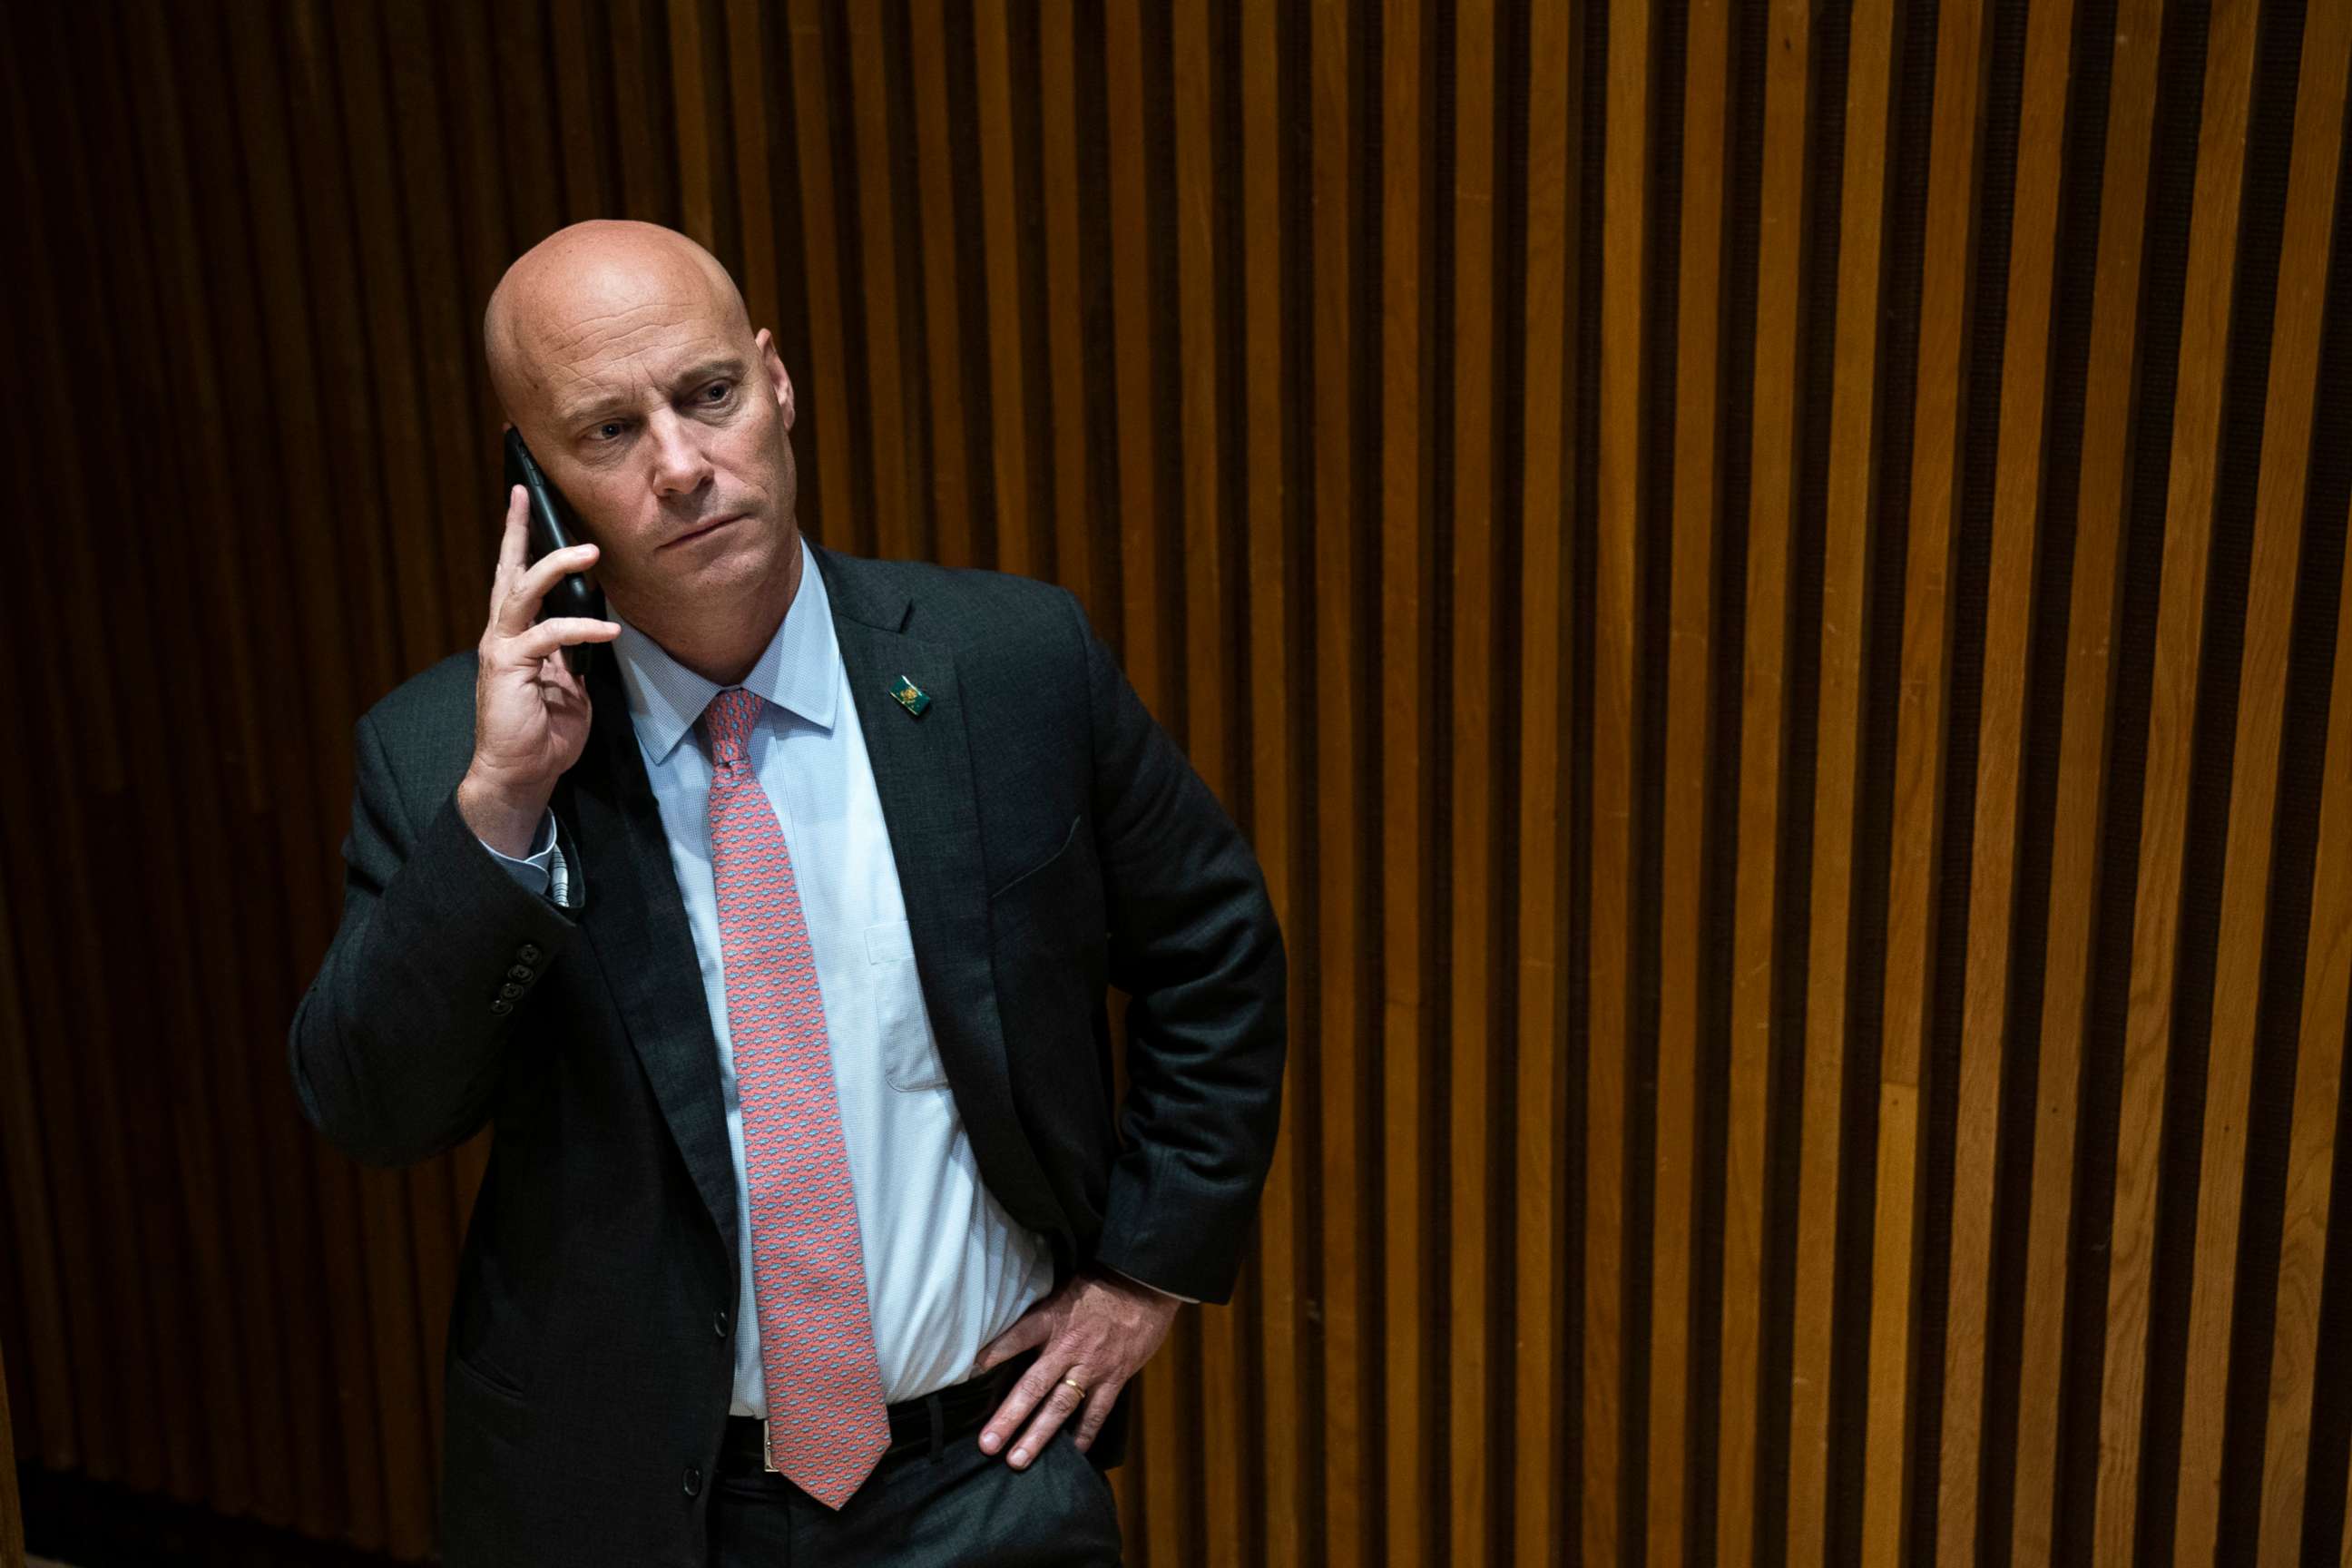 PHOTO: In this Sept. 19, 2019, file photo, Marc Short, Chief of Staff to Vice President Mike Pence, takes a phone call in New York.